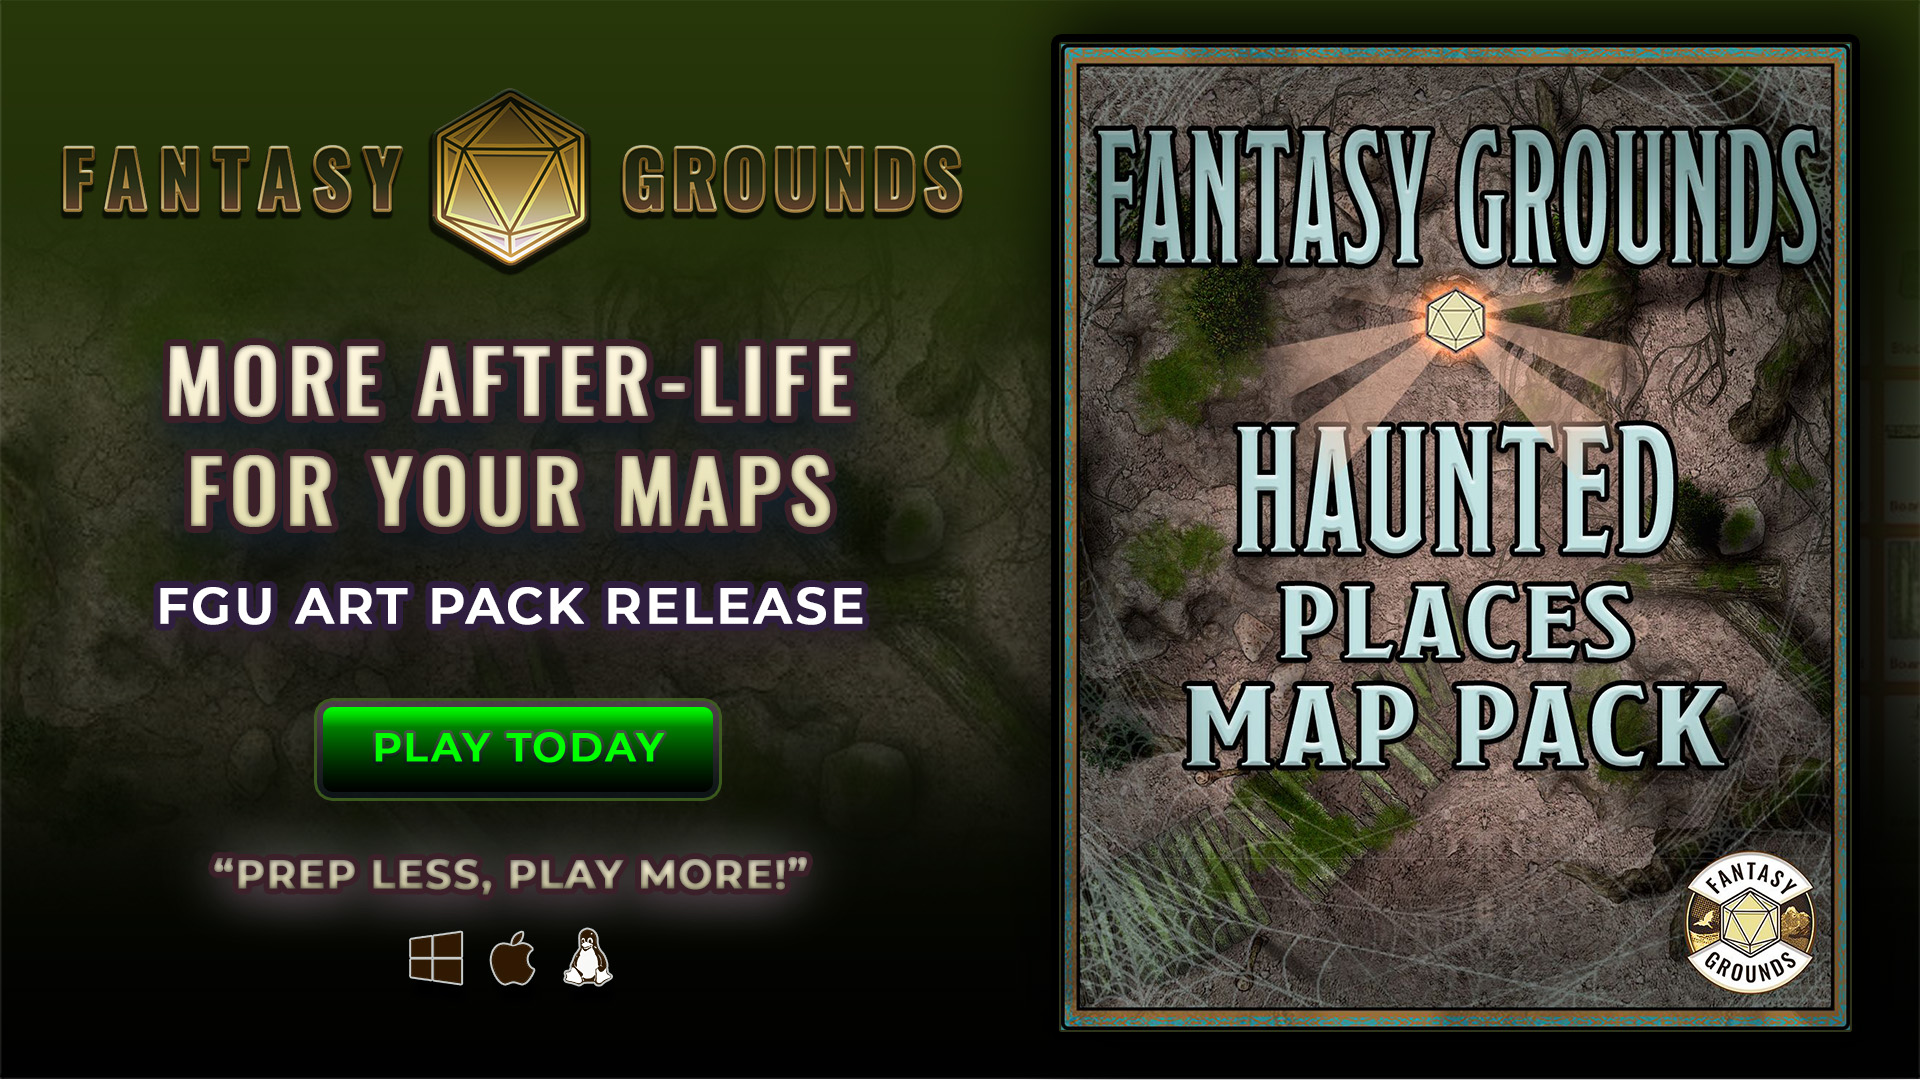 FG Haunted Places Map Pack (SWKARTPACKHNTDPLACES).jpg